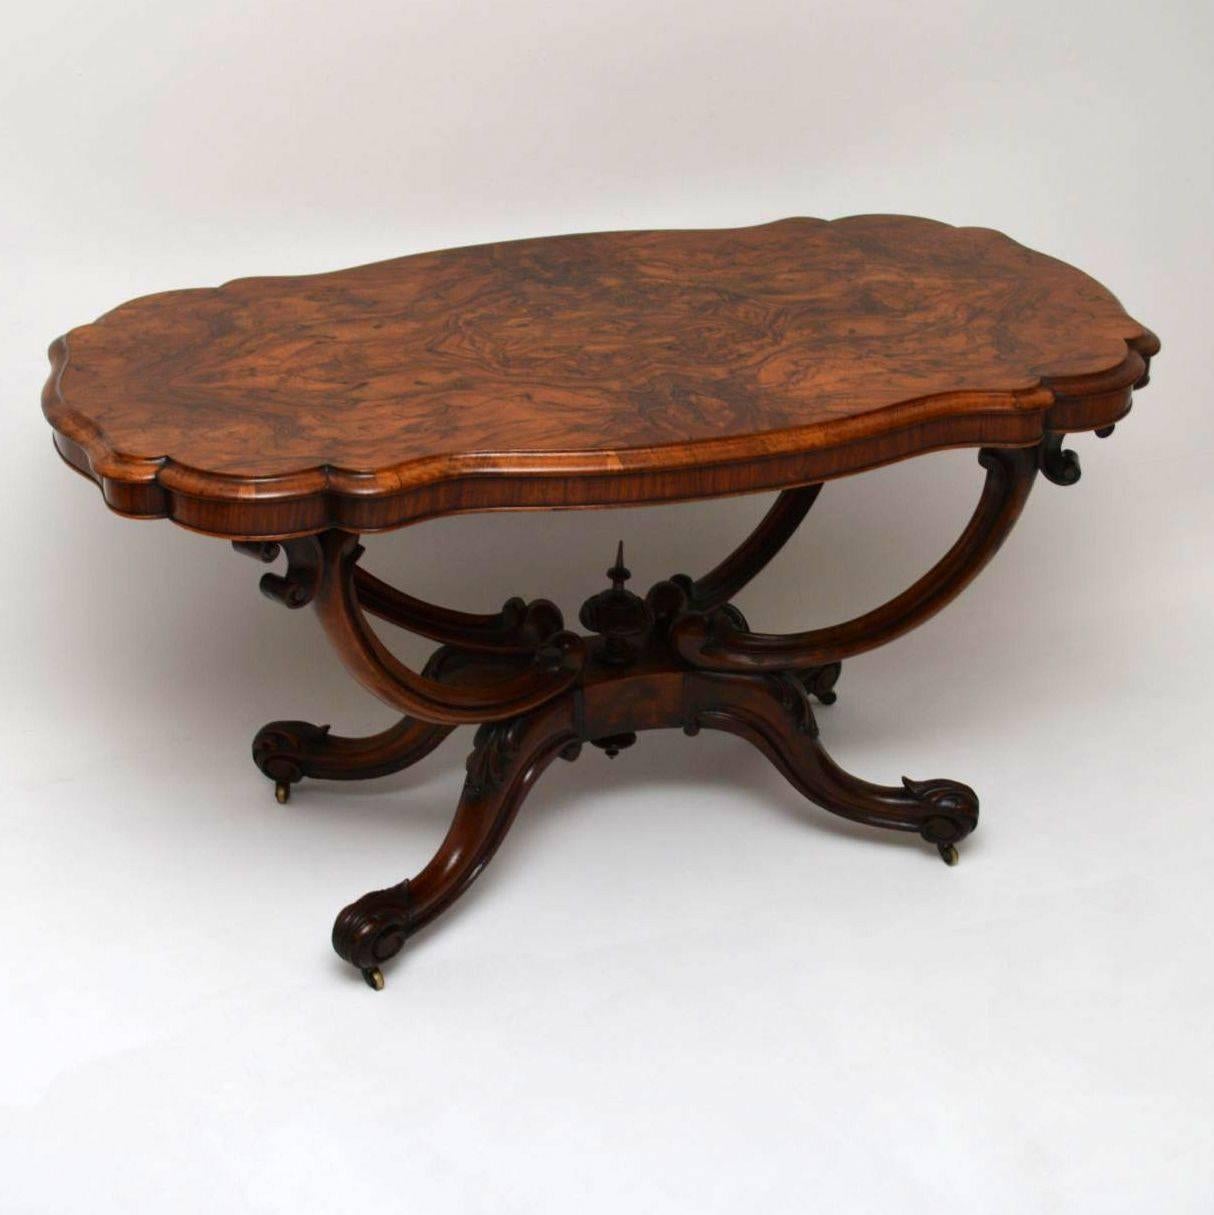 This antique Victorian centre table is a stunning piece of furniture and is 100% original. It has a shaped scalloped burr walnut top with amazing patterns within the veneers, which sits on top of a solid walnut basket shaped base. This table has a